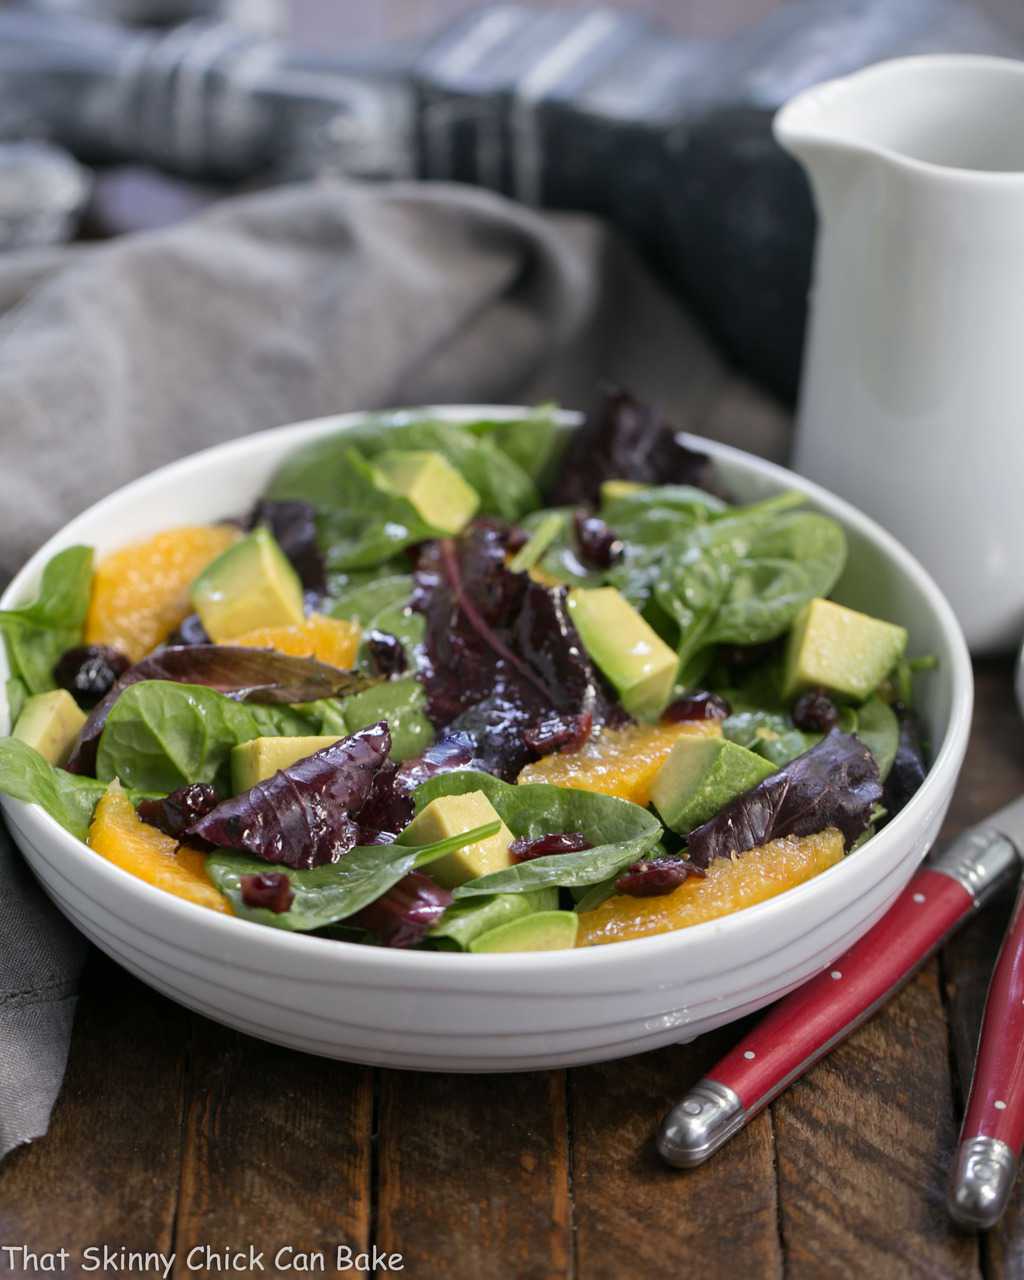 A tasty Citrus Spinach Salad with Avocados and Oranges in a white bowl drizzled with vinaigrette.